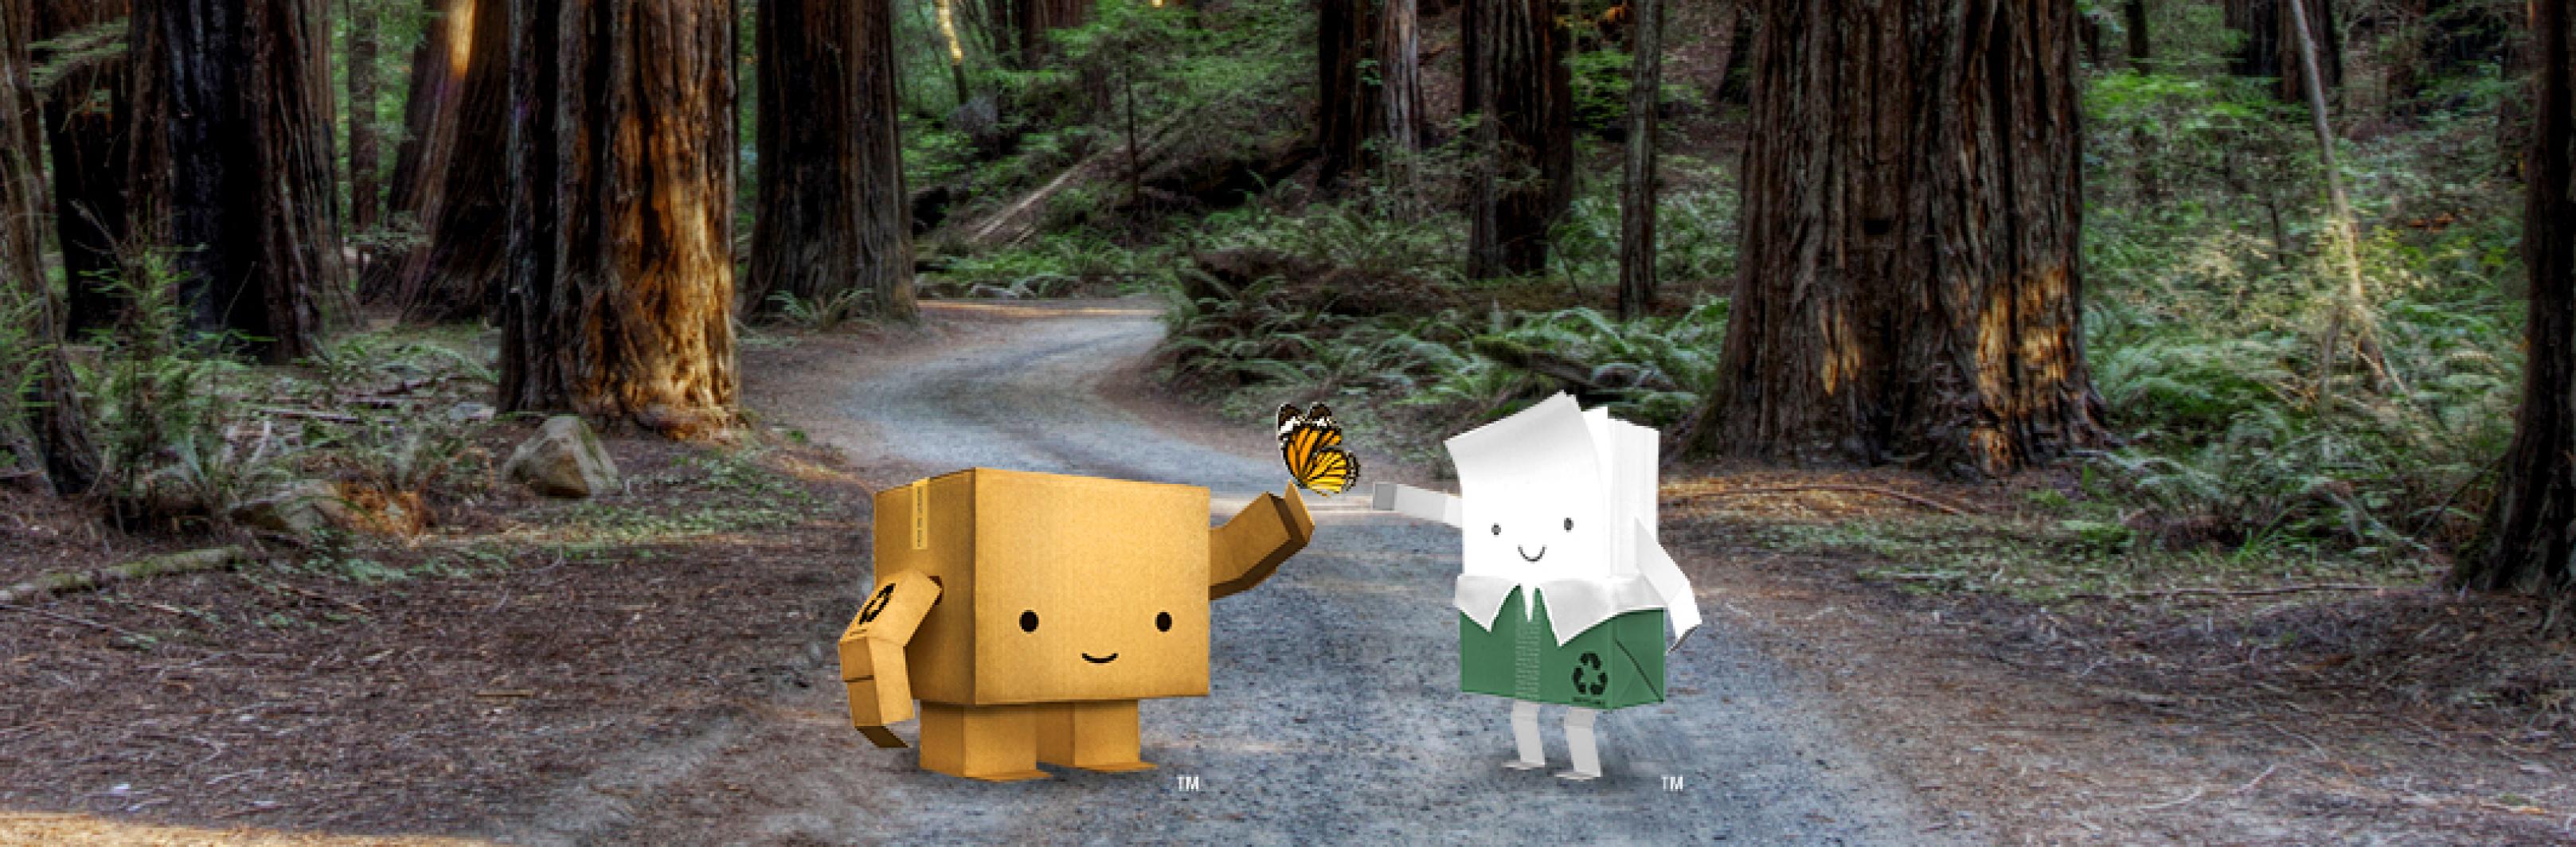 Paper and packaging characters in the forest